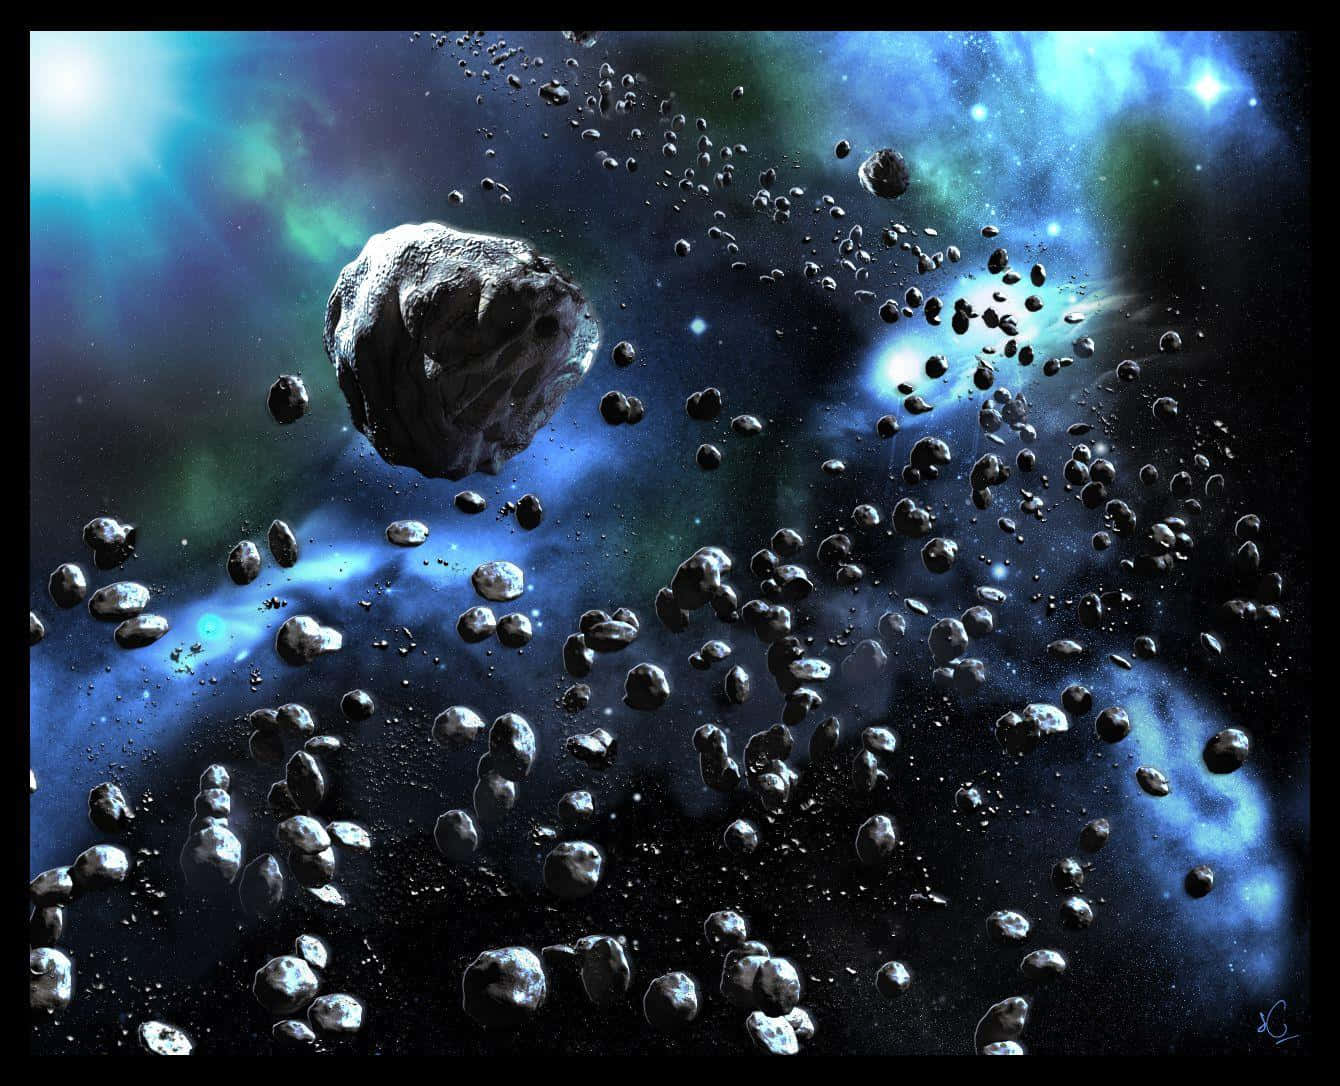 Caption: Spectacular Asteroid Approaching Planet Earth Wallpaper